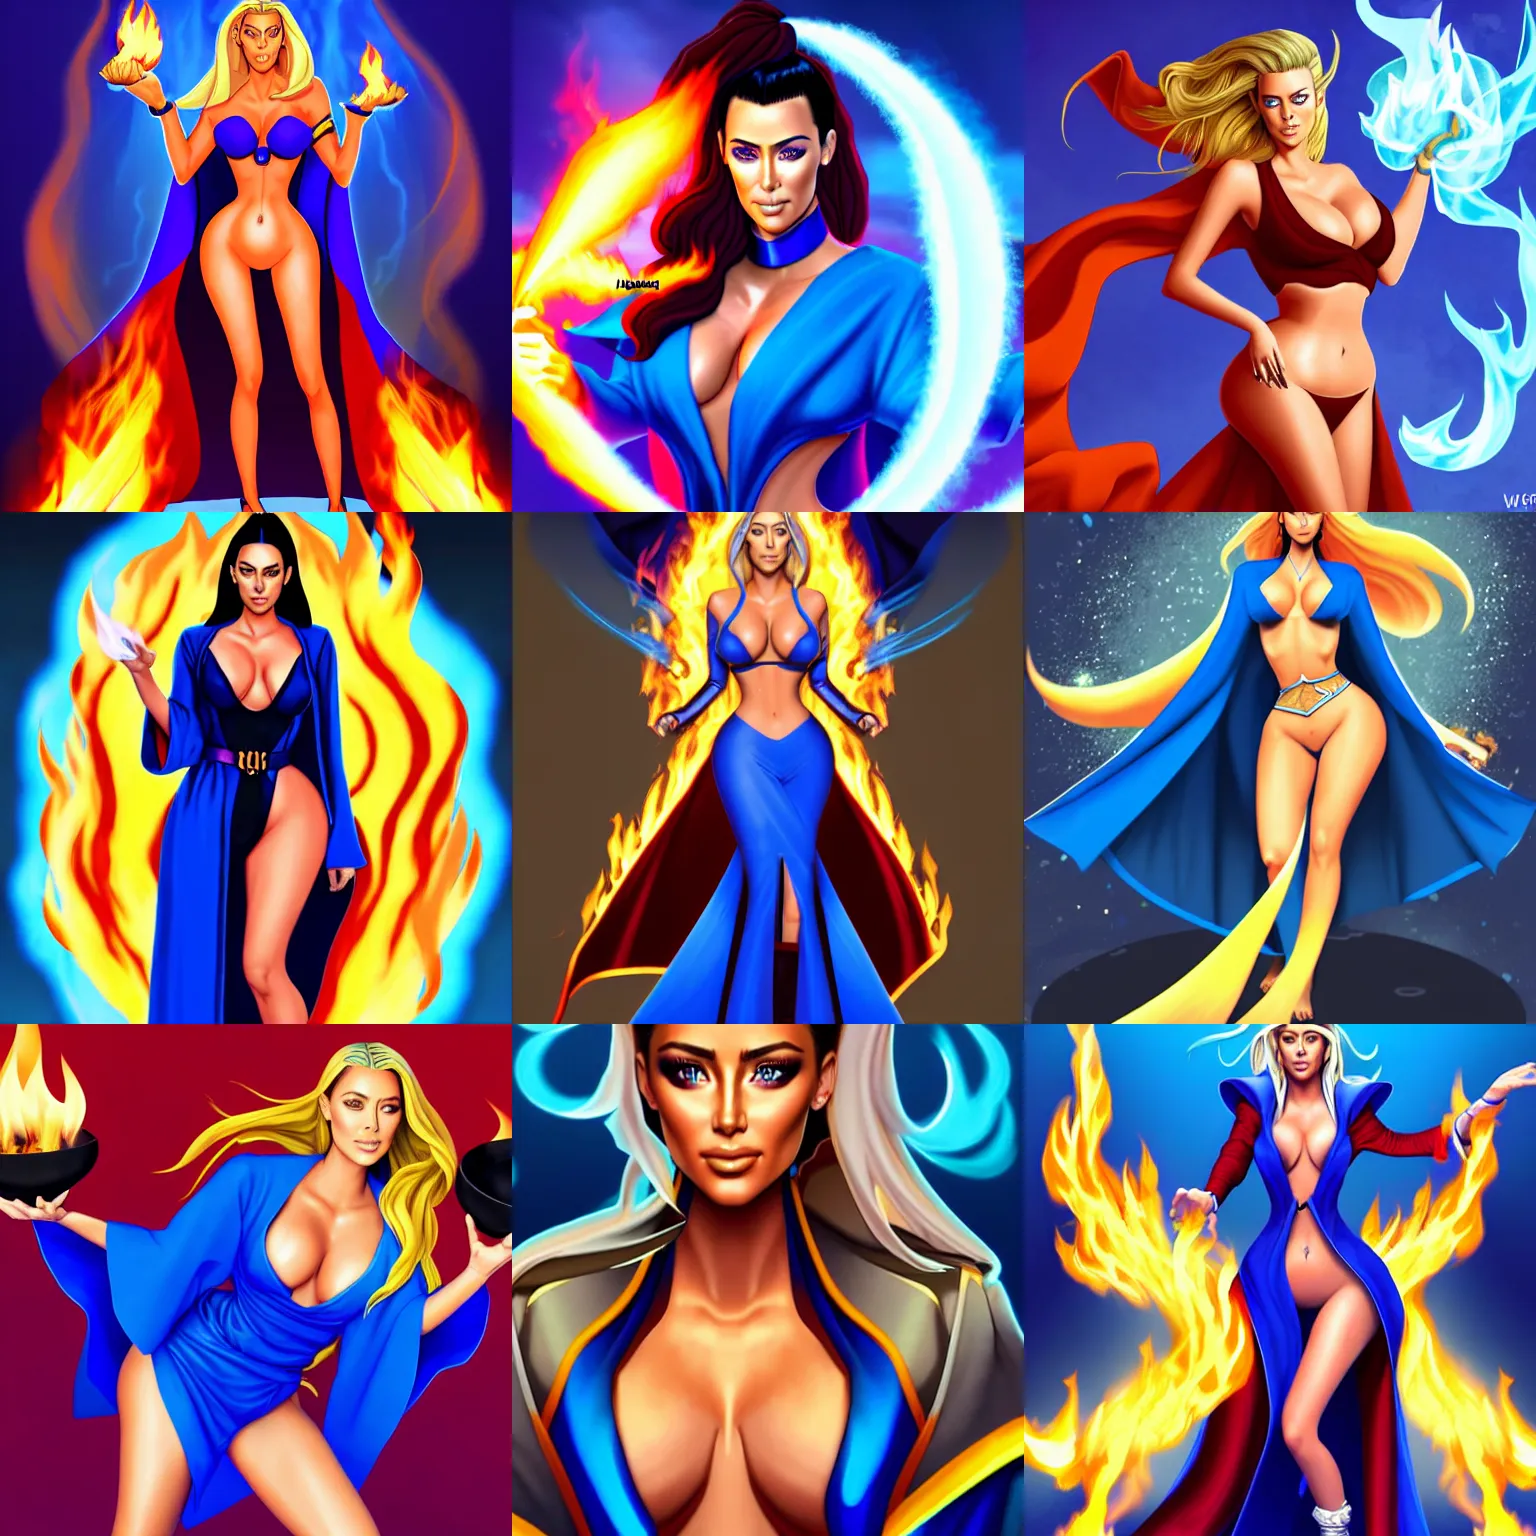 Prompt: Who : a mage with a blue robe casting a fire ball ; Face and hair : Amber Heard ; Body type : Kim Kardashian ; Clothes : covering ; IMPORTANT : LeraPI official splash art, award winning, trending in category \'hyperdetailed\'